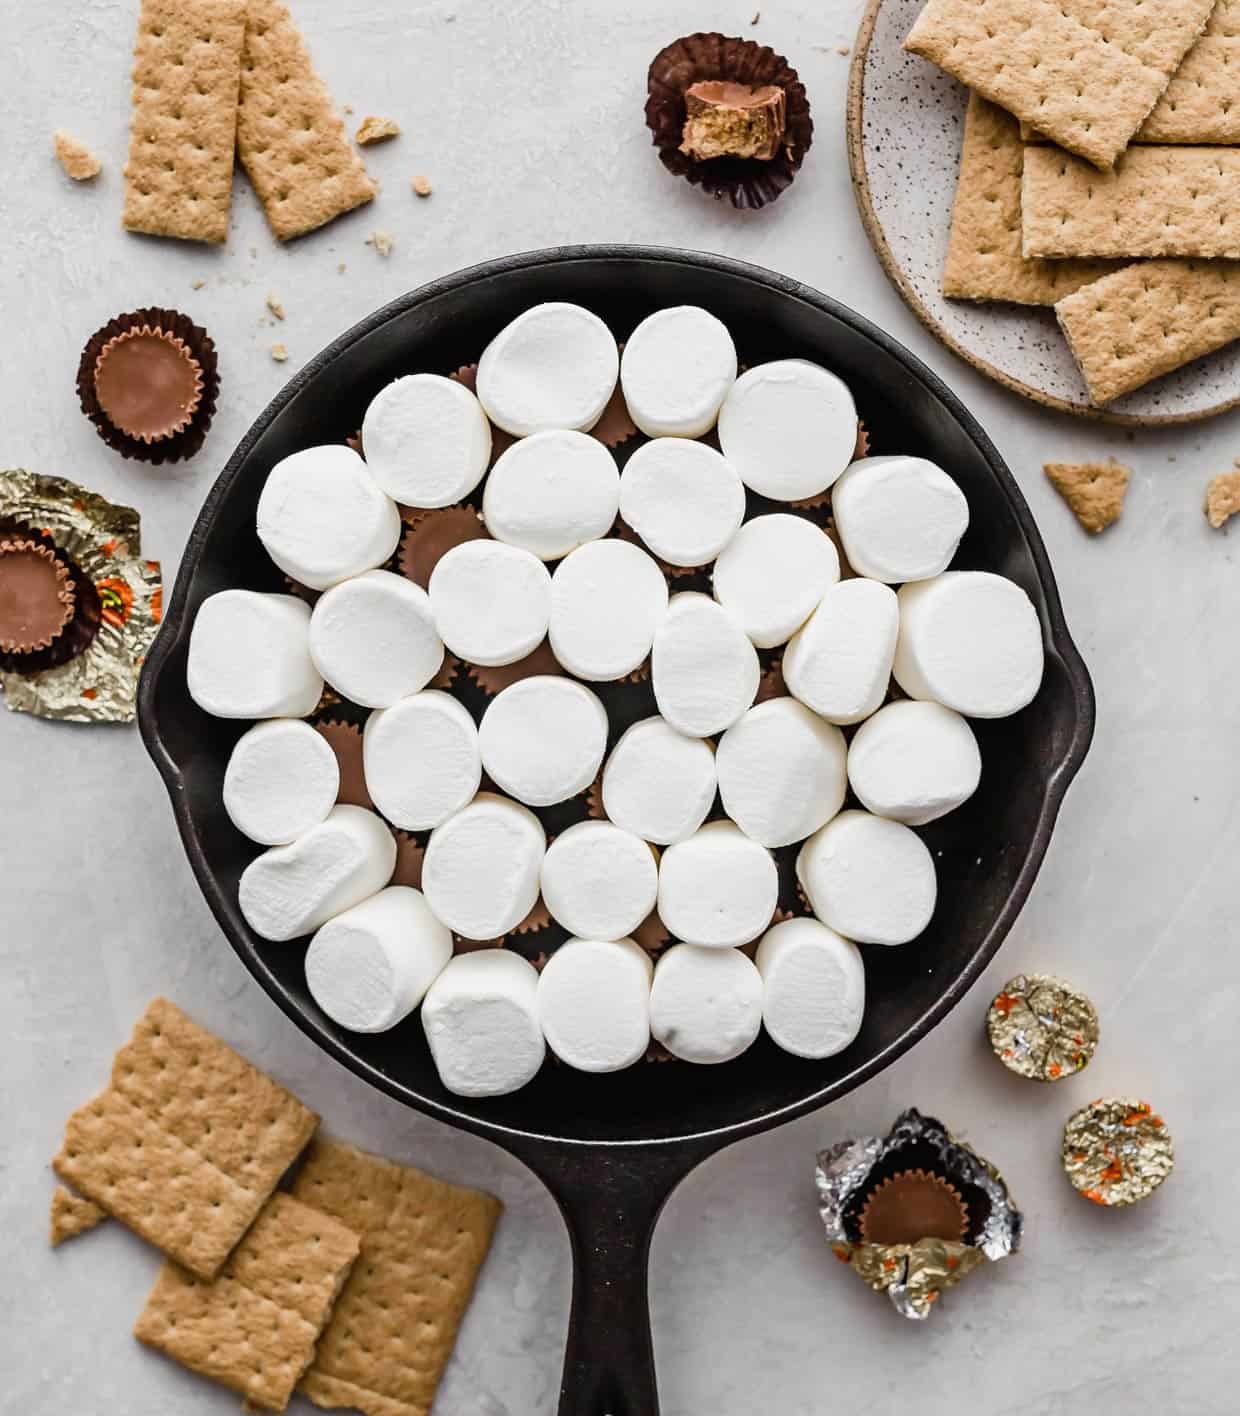 Large marshmallows overtop of Reese's peanut butter cups in a black skillet.